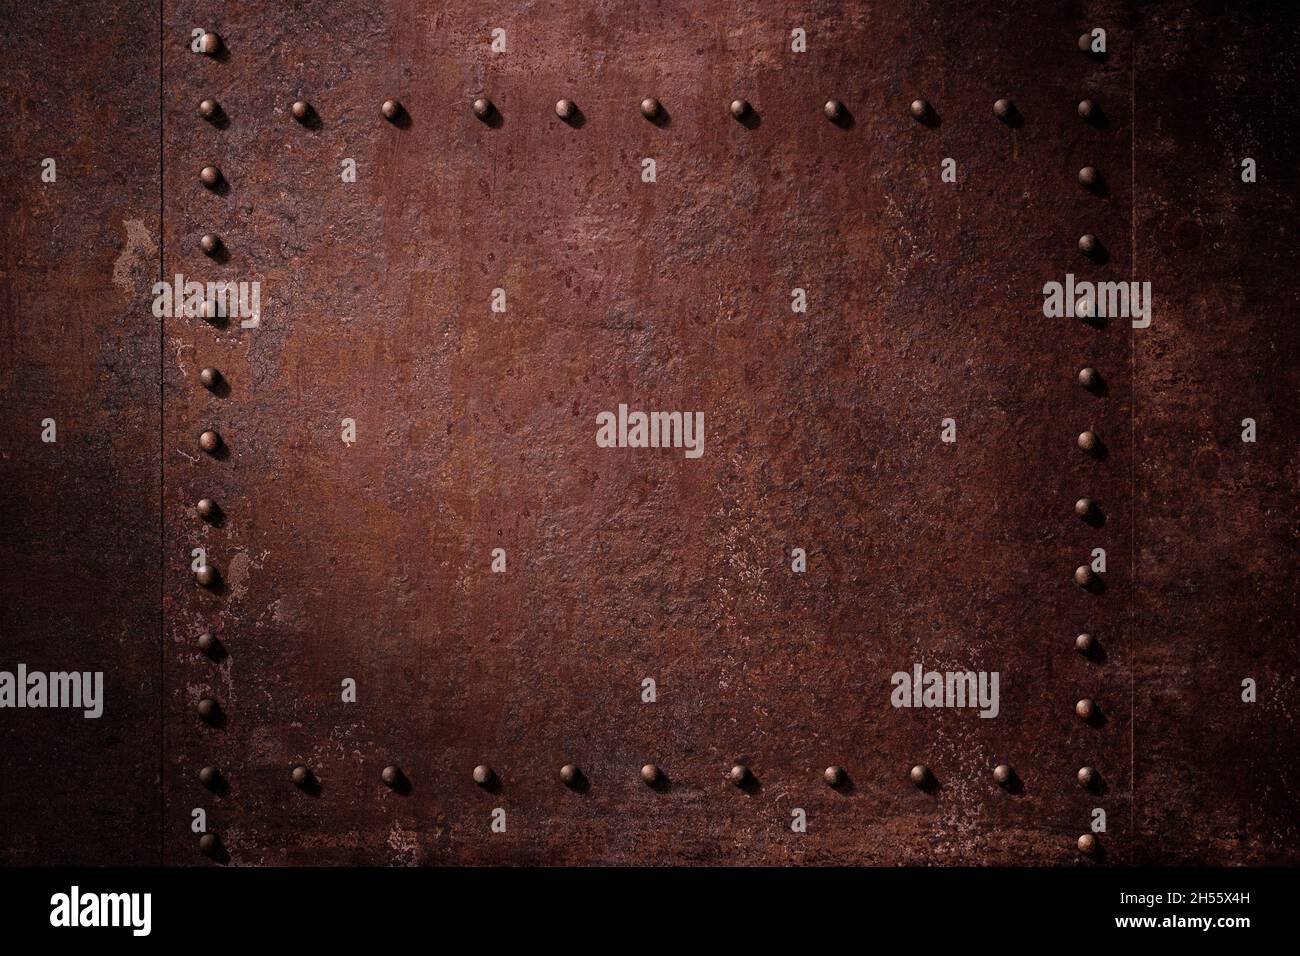 rustic steam punk rivets metal background Stock Photo